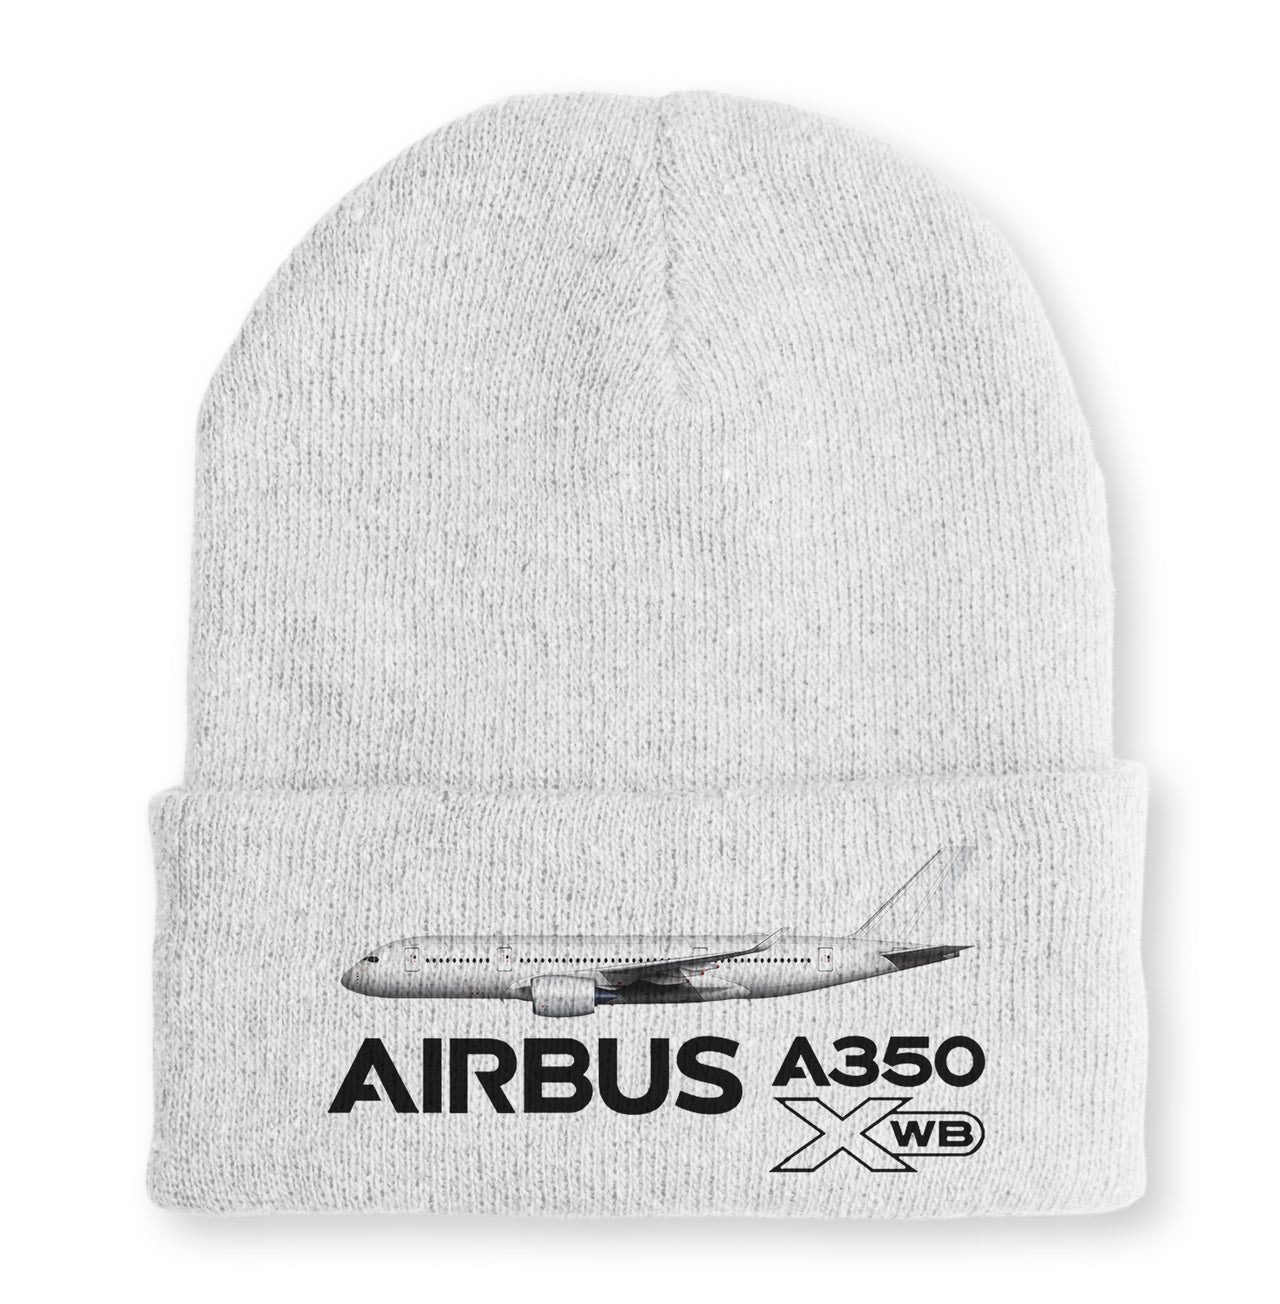 The Airbus A350 WXB Embroidered Beanies